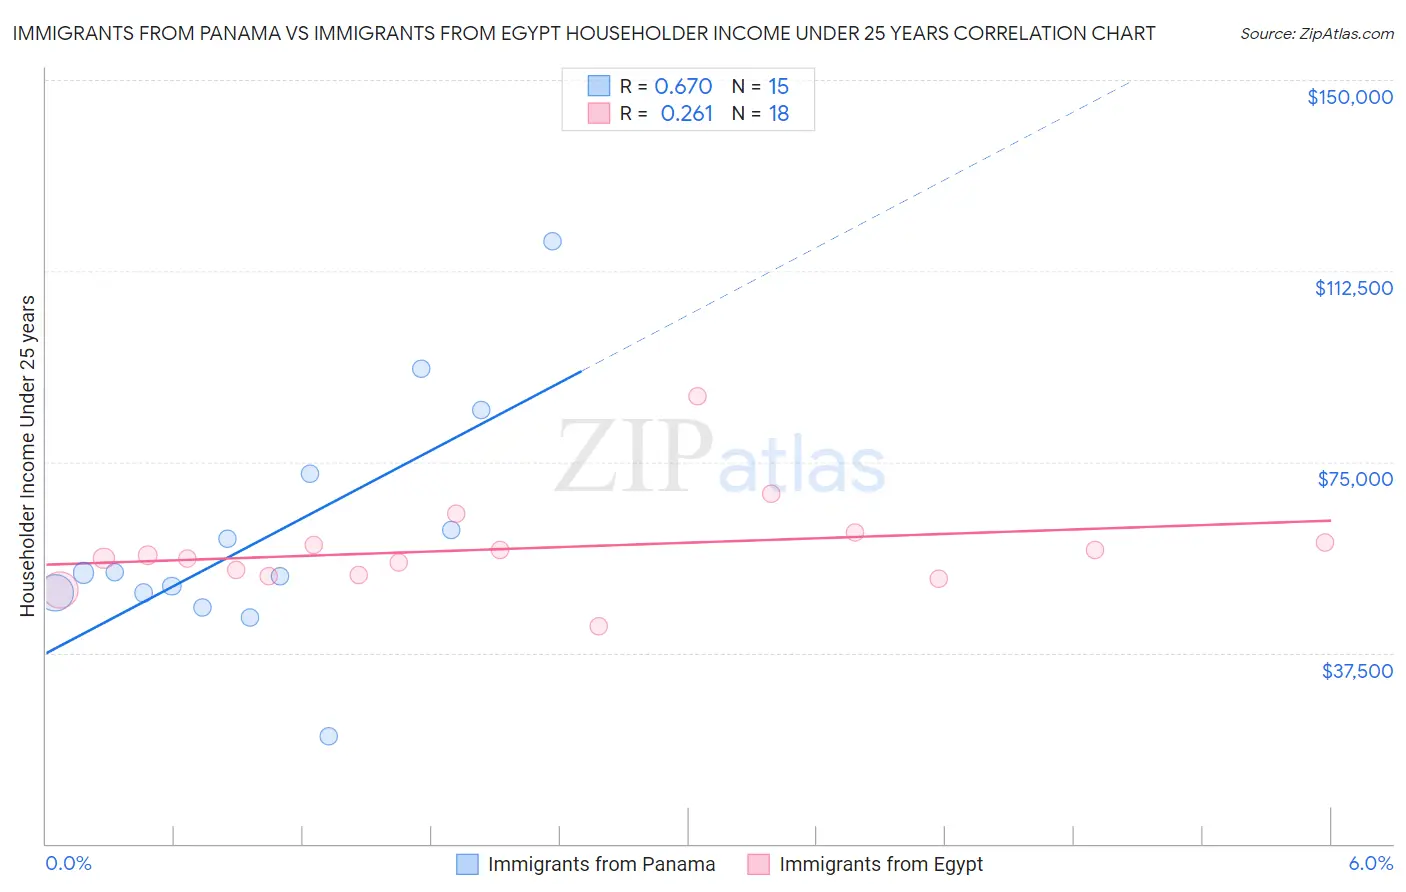 Immigrants from Panama vs Immigrants from Egypt Householder Income Under 25 years